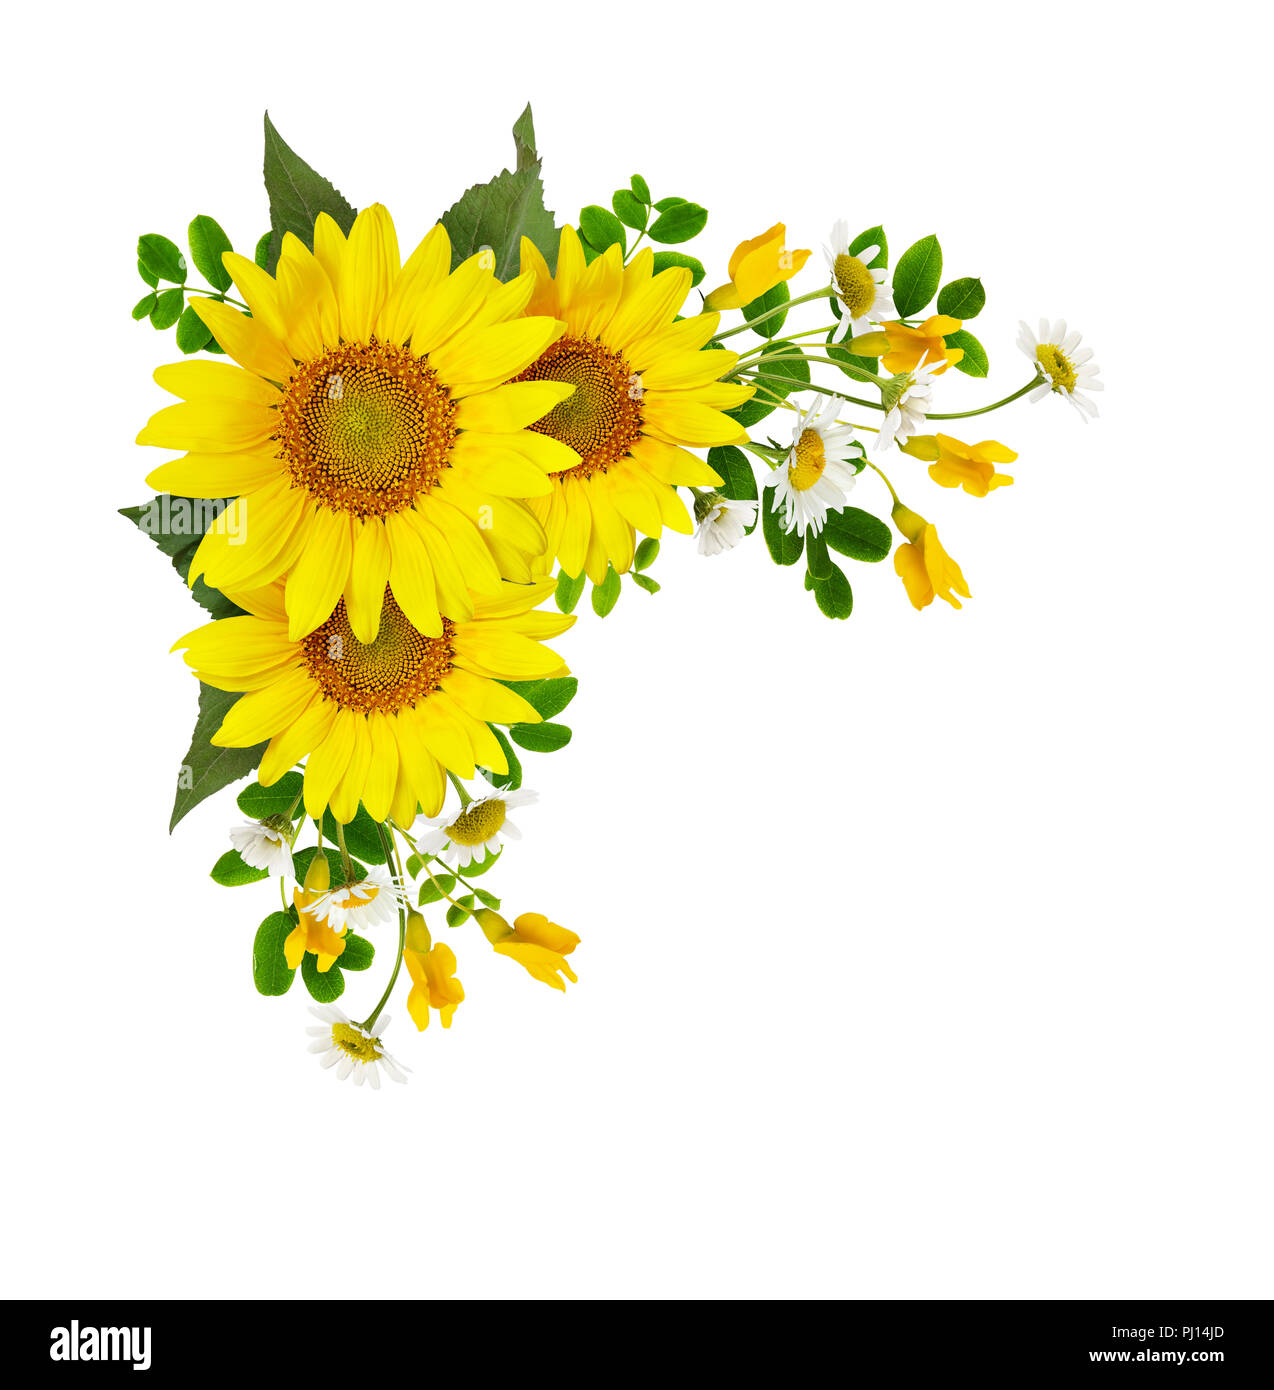 Sunflowers, daisies and acacia flowers in a corner arramgement isolated on white background. Flat lay. Top view. Stock Photo